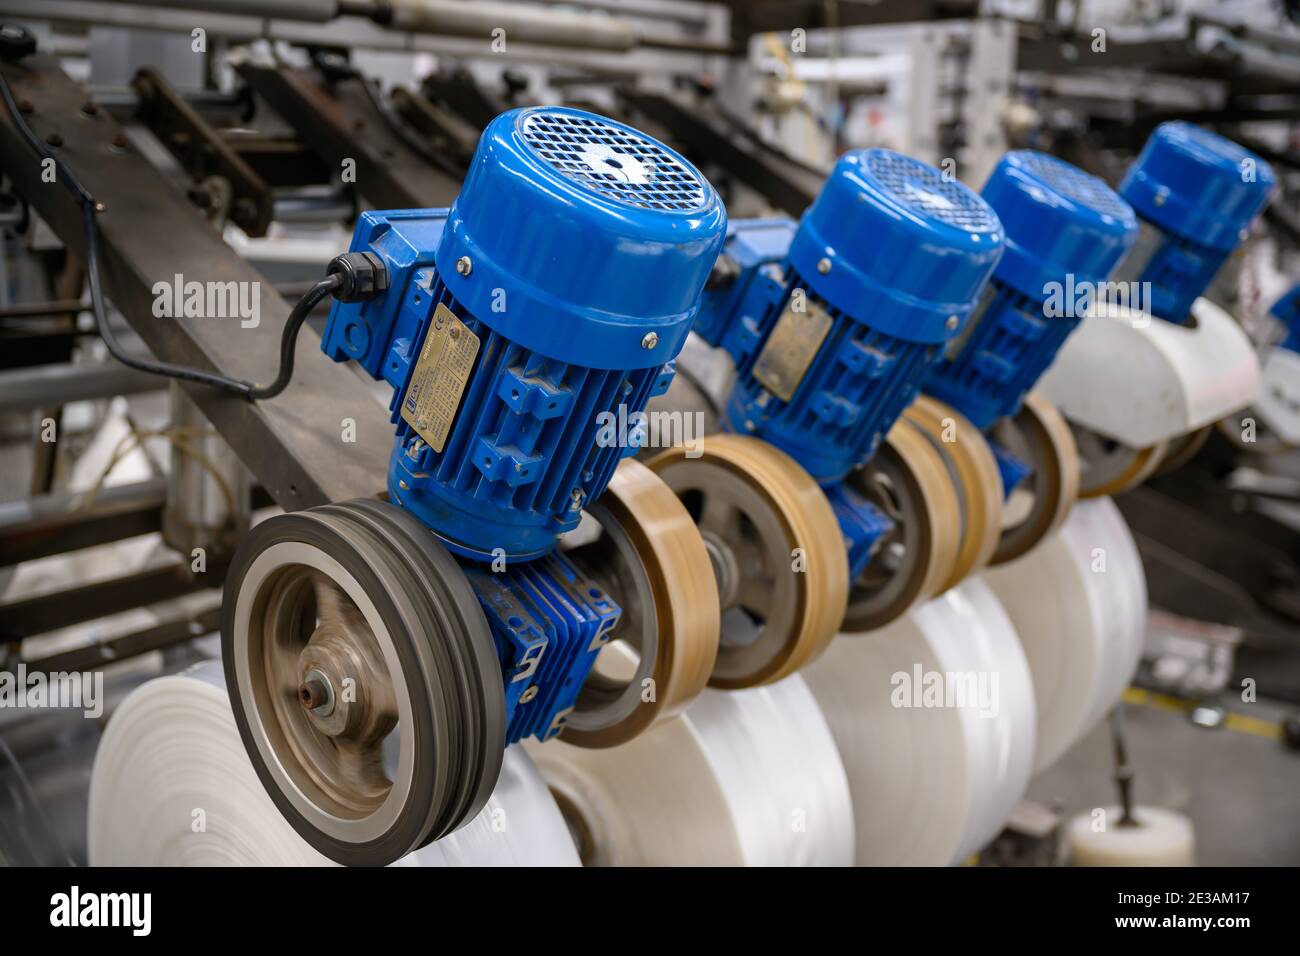 Motor control sets to send plastic film rolls into the machine to produce a shopping bag. In the concept of Save the world and the environment. Stock Photo